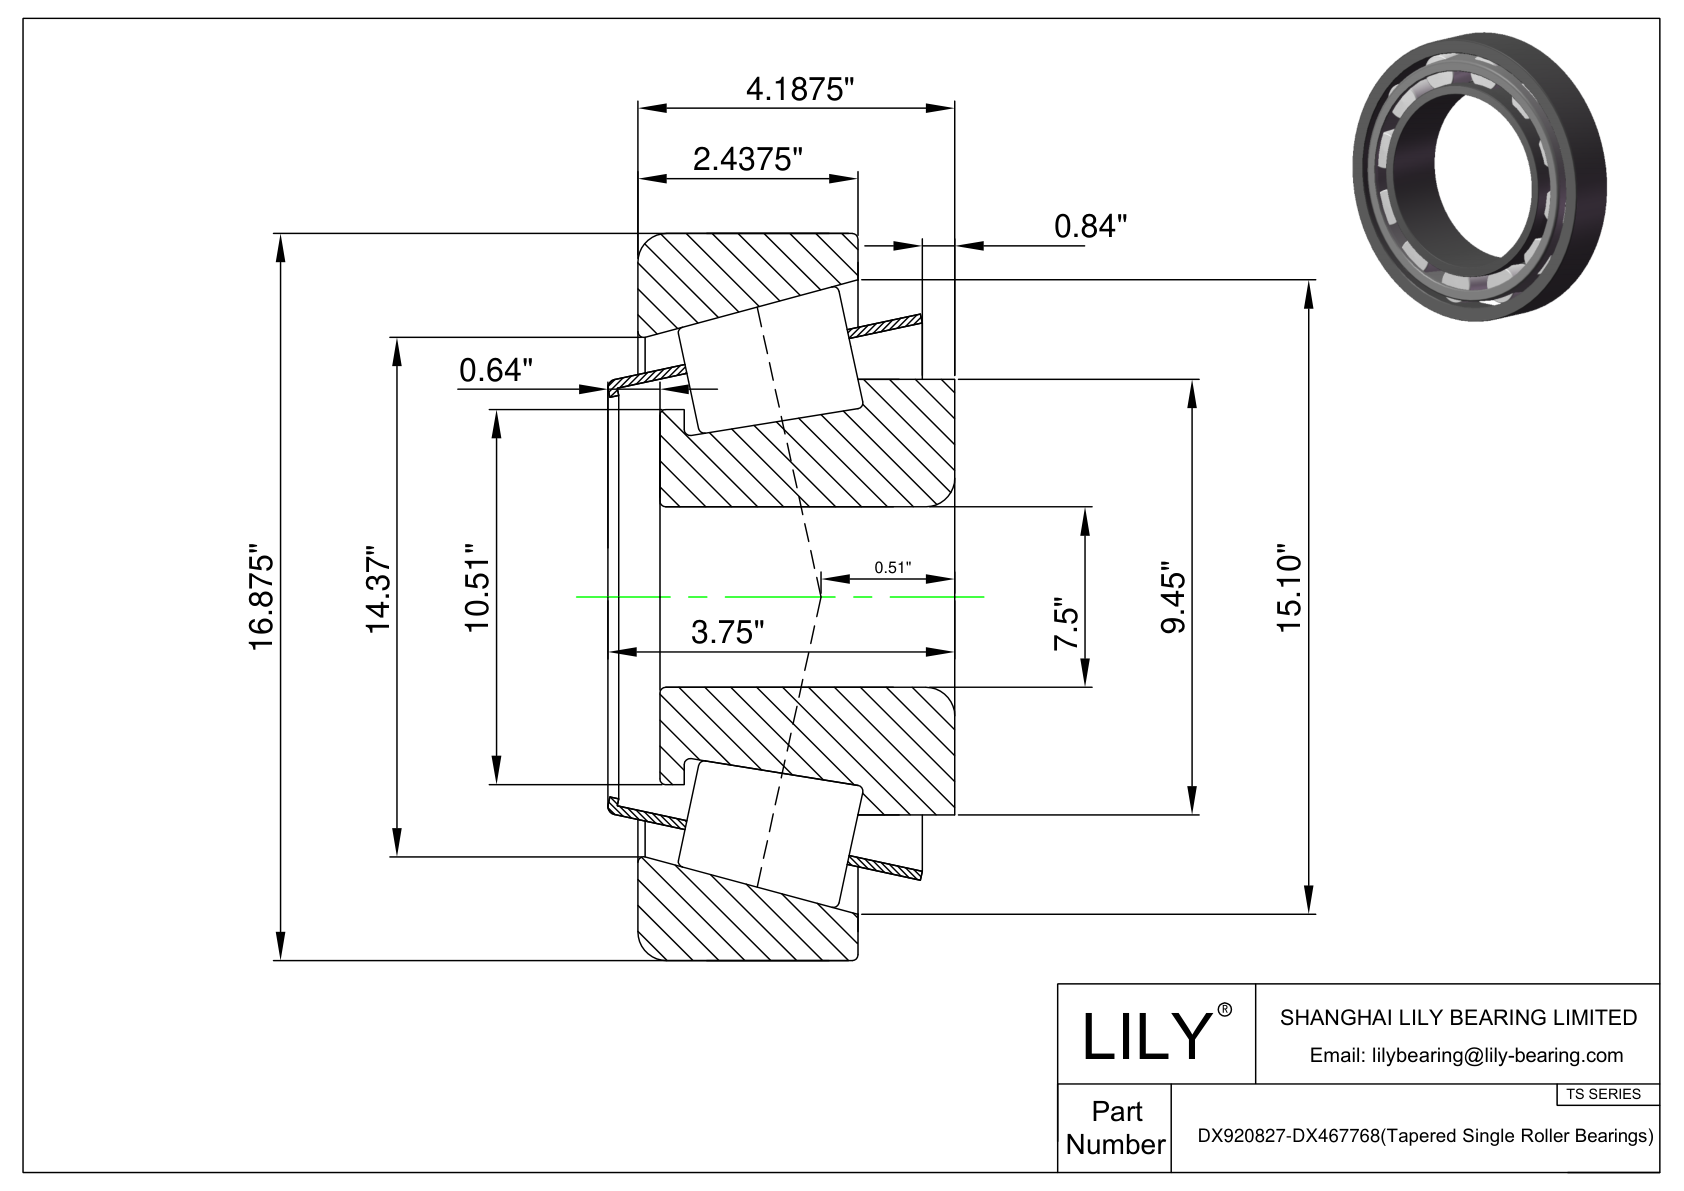 DX920827-DX467768 TS (Tapered Single Roller Bearings) (Imperial) cad drawing